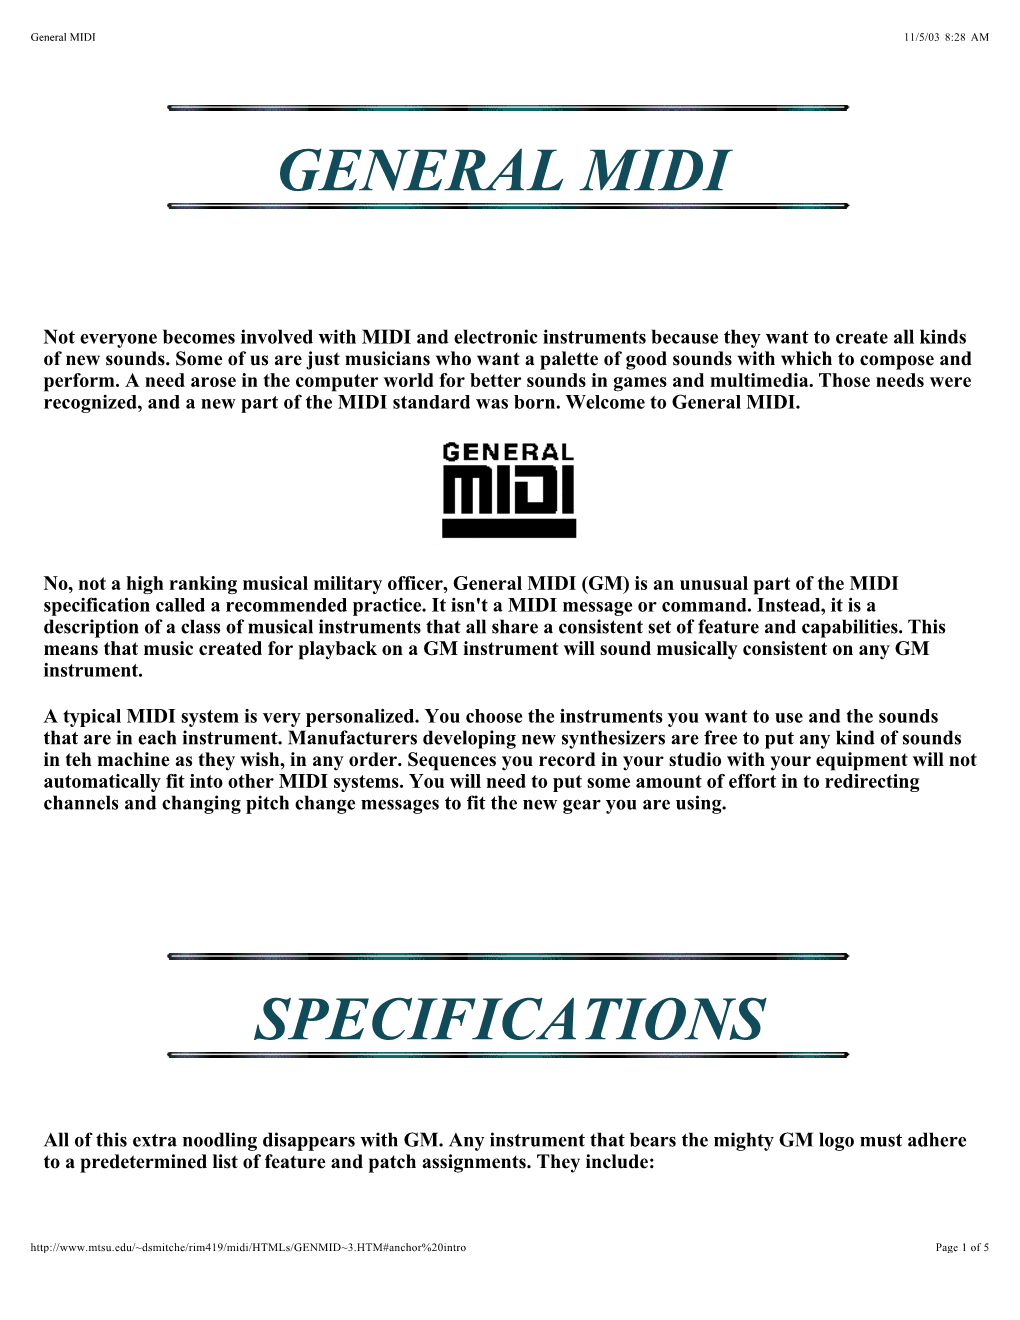 General Midi Specifications